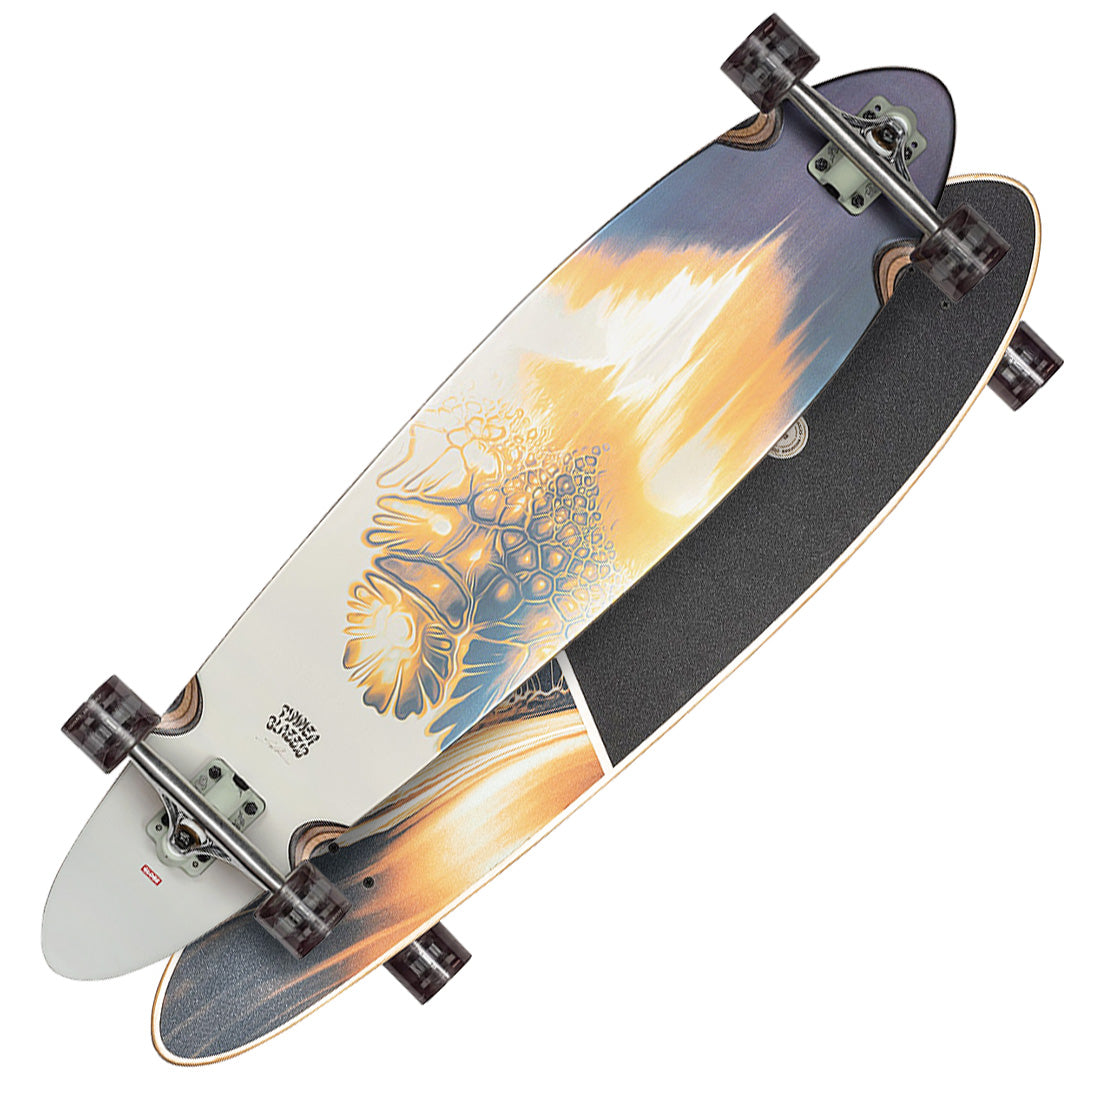 Globe Pinner Classic 40 Complete - Gold Vein Skateboard Completes Longboards